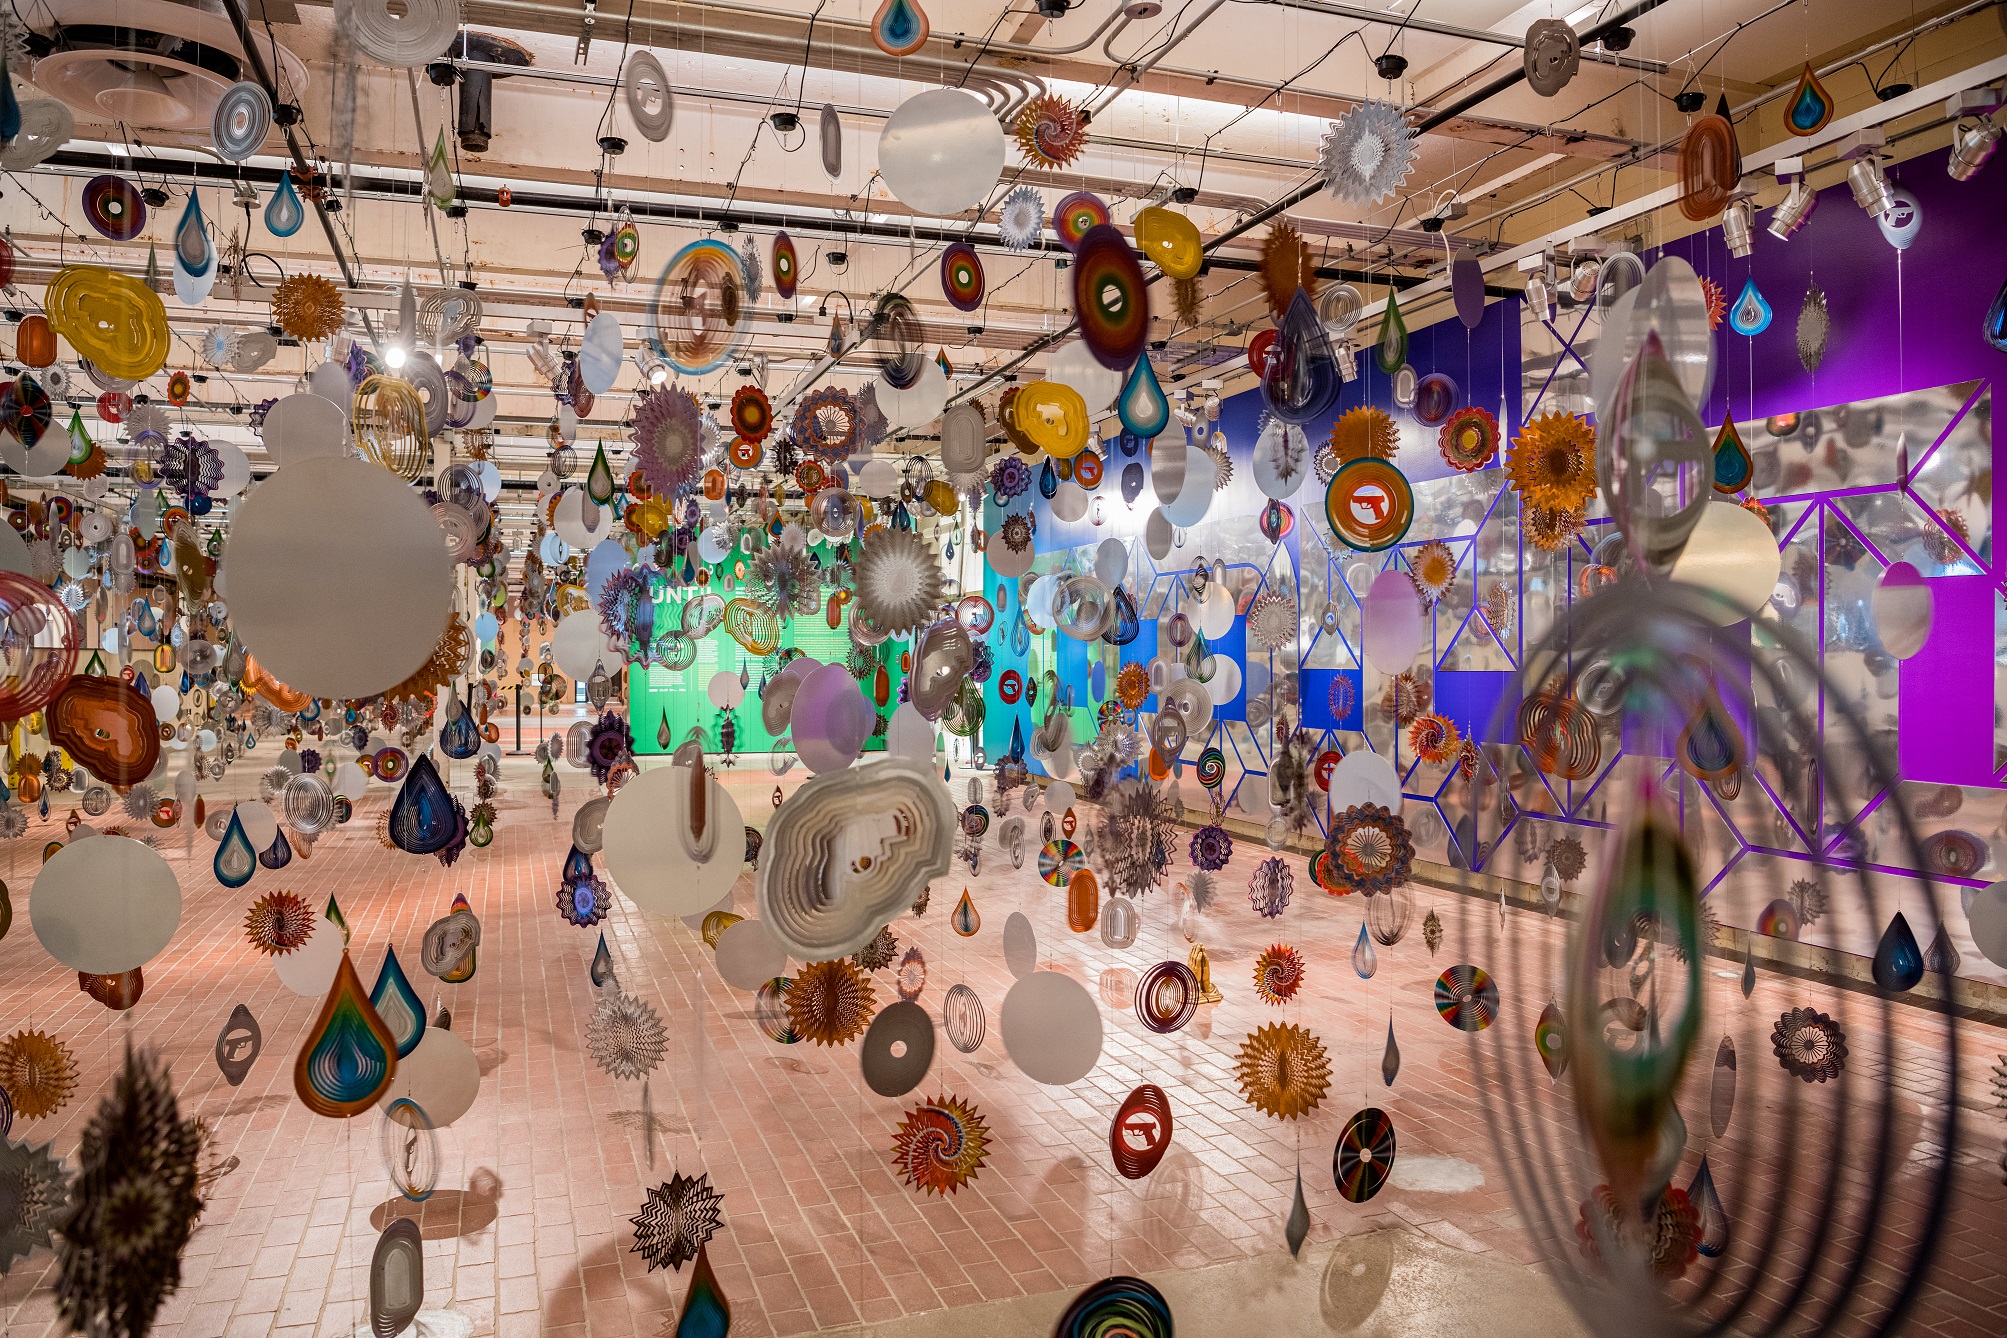 Nick Cave: Until installation, the Momentary